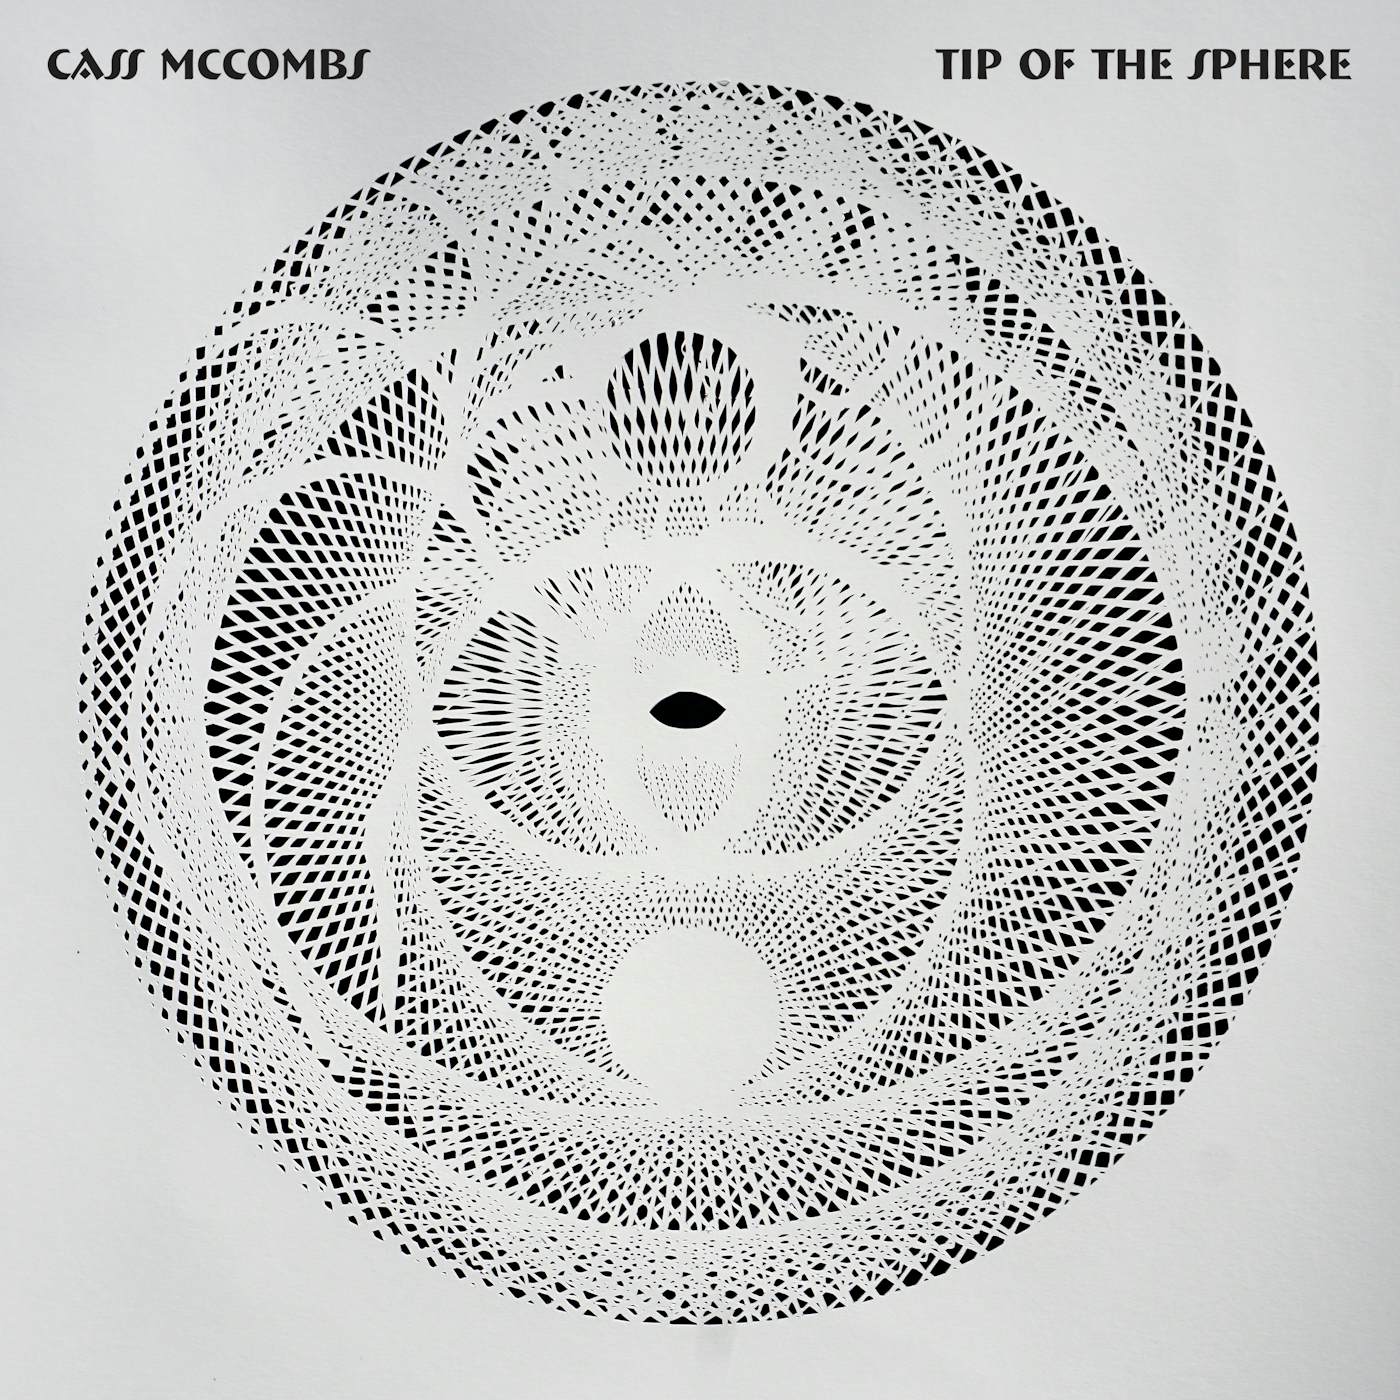 Cass McCombs TIP OF THE SPHERE CD